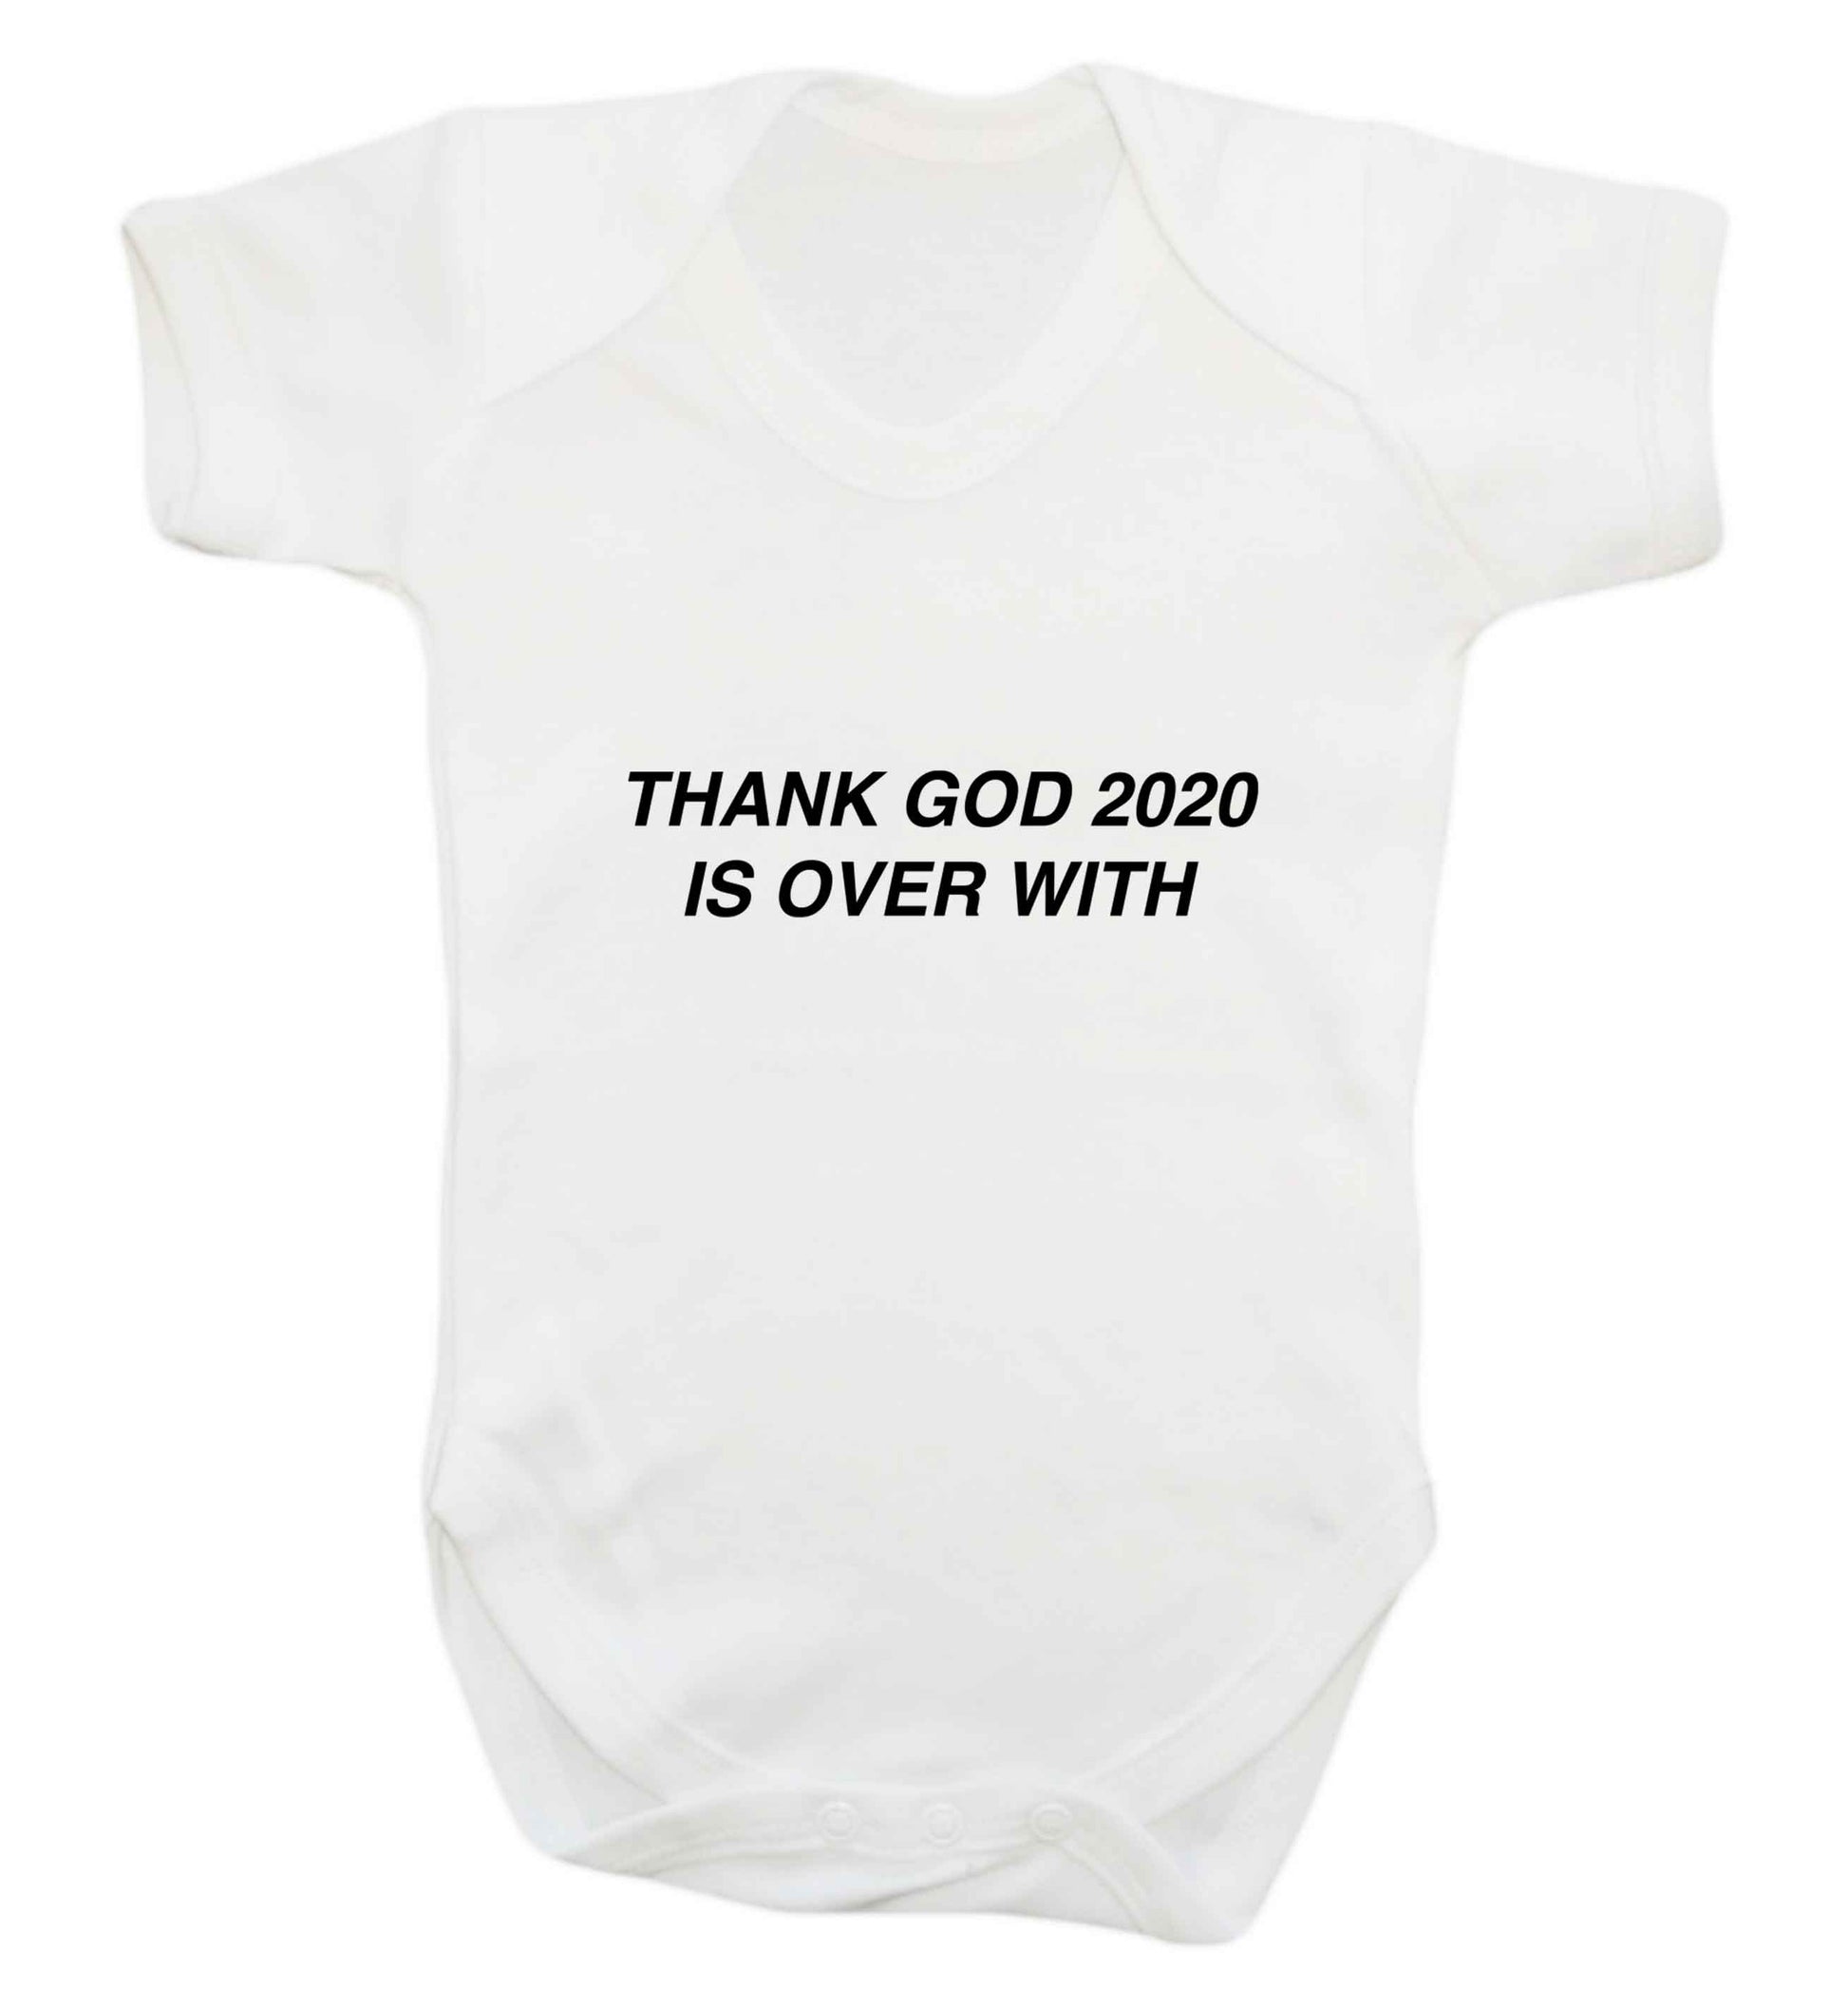 Thank god 2020 is over with baby vest white 18-24 months